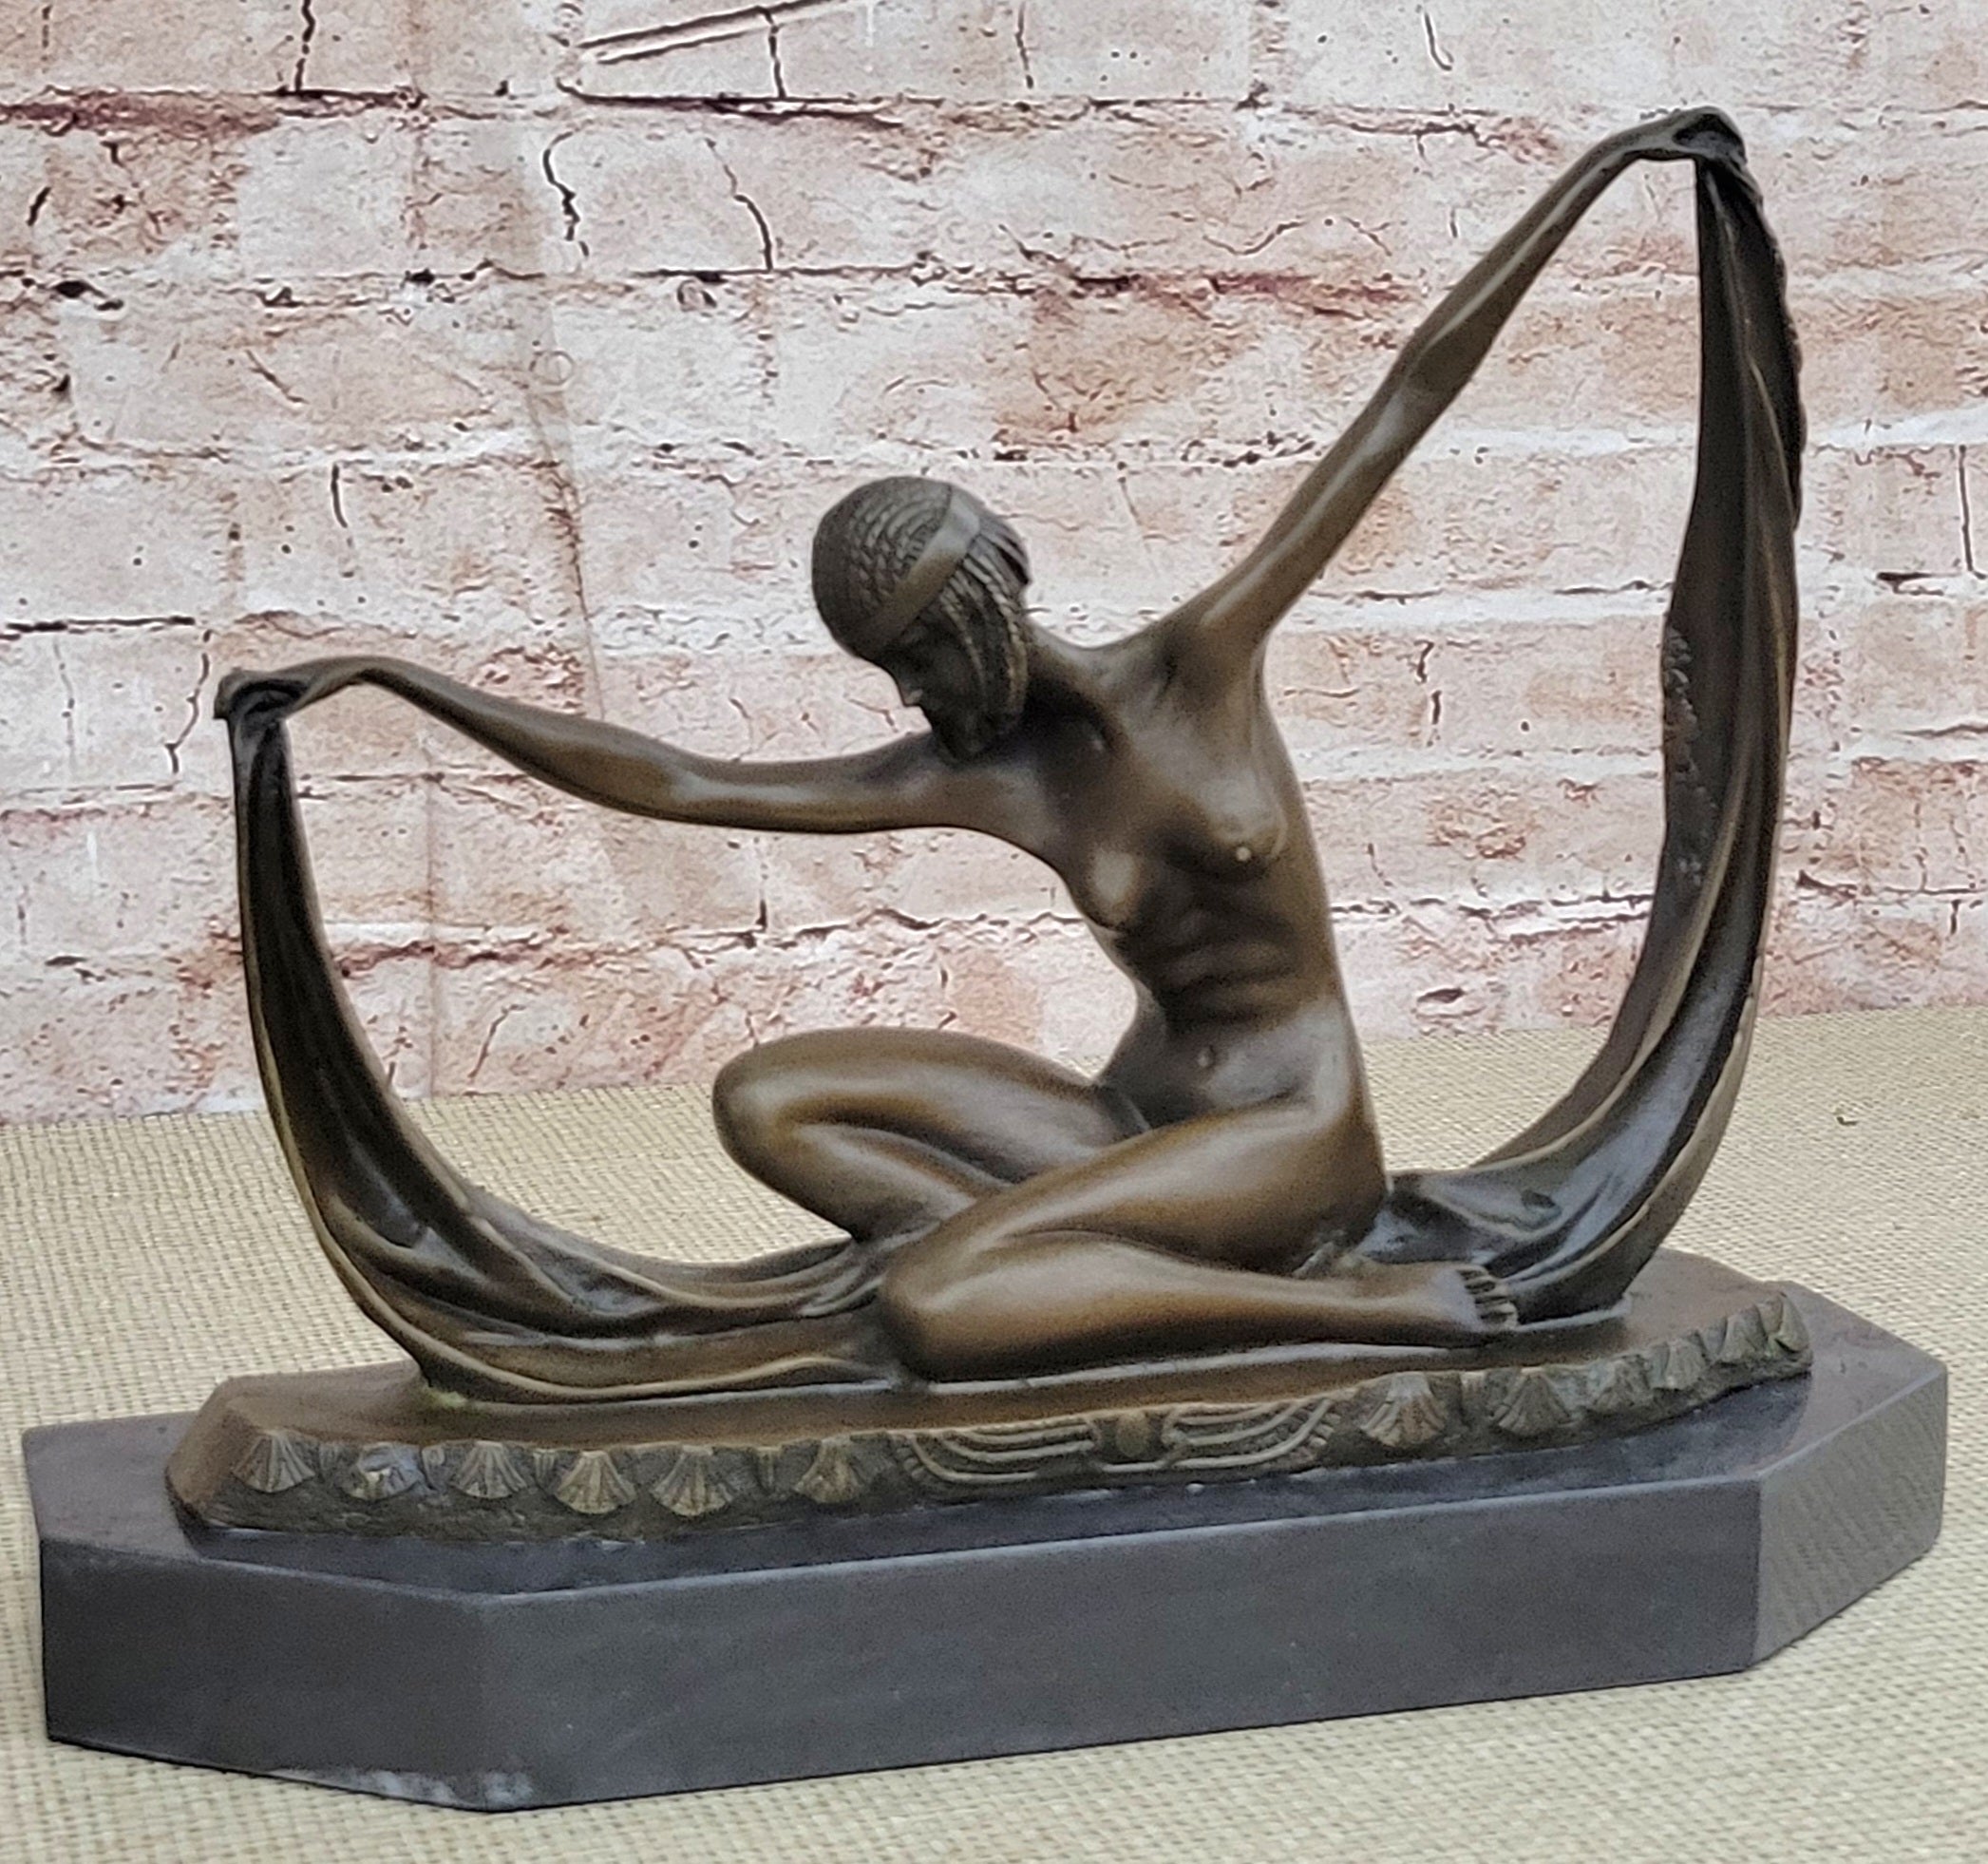 Handcrafted bronze Nude sculpture Modern Deco Art Abstract . C.Mirval Lost Wax